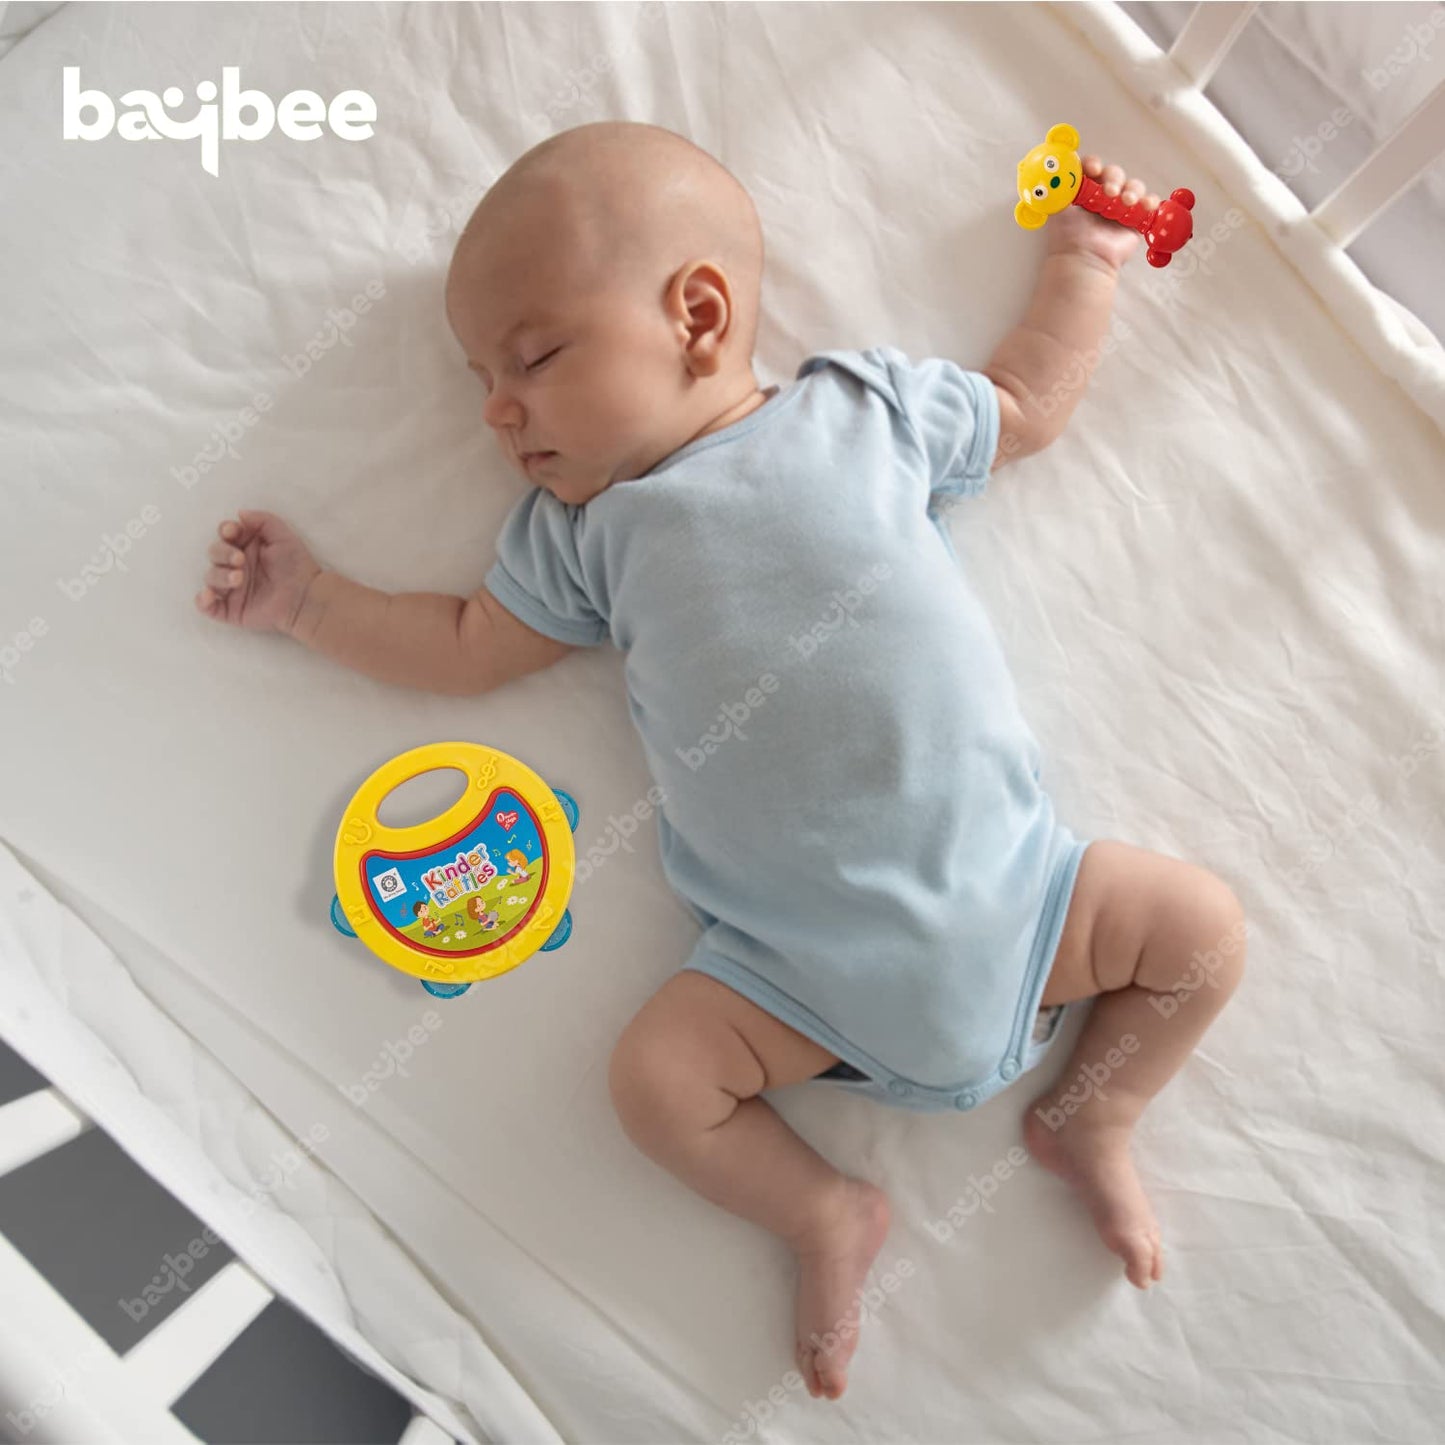 Baybee Pack of 2 Baby Toys Rattles Set with Smooth Edges for Babies.